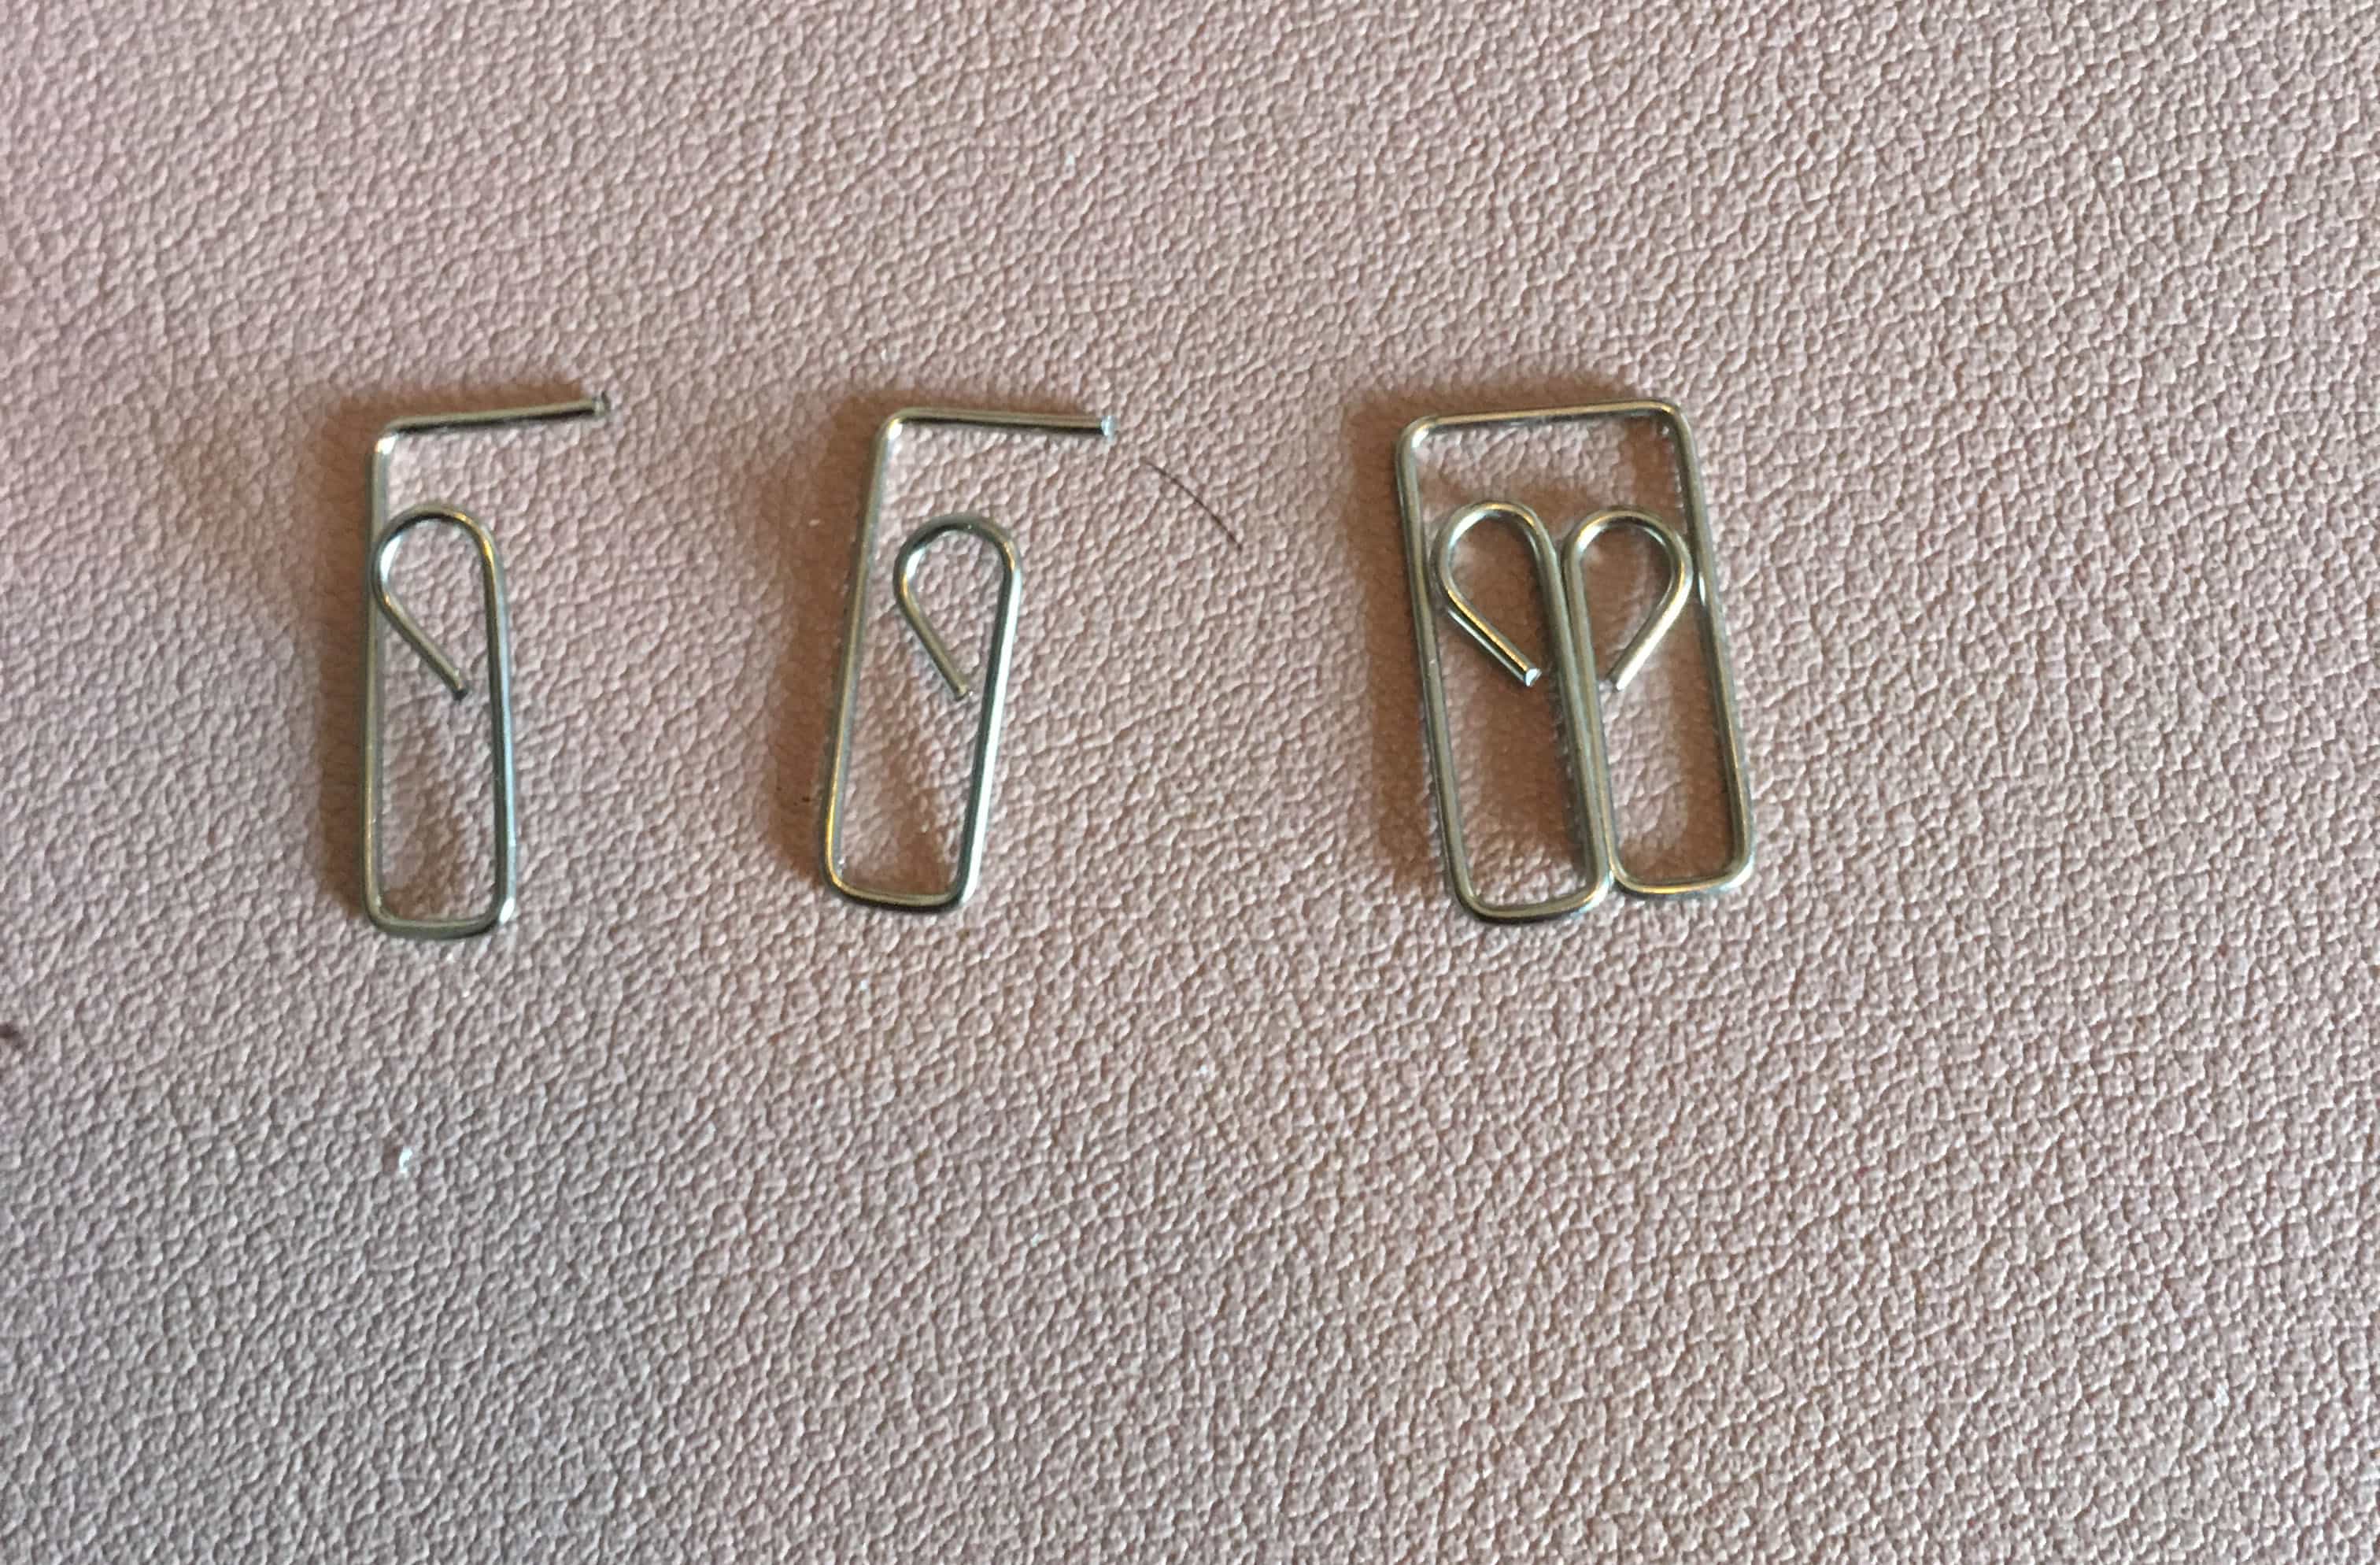 Two clipped paperclips and one that has not been cut.